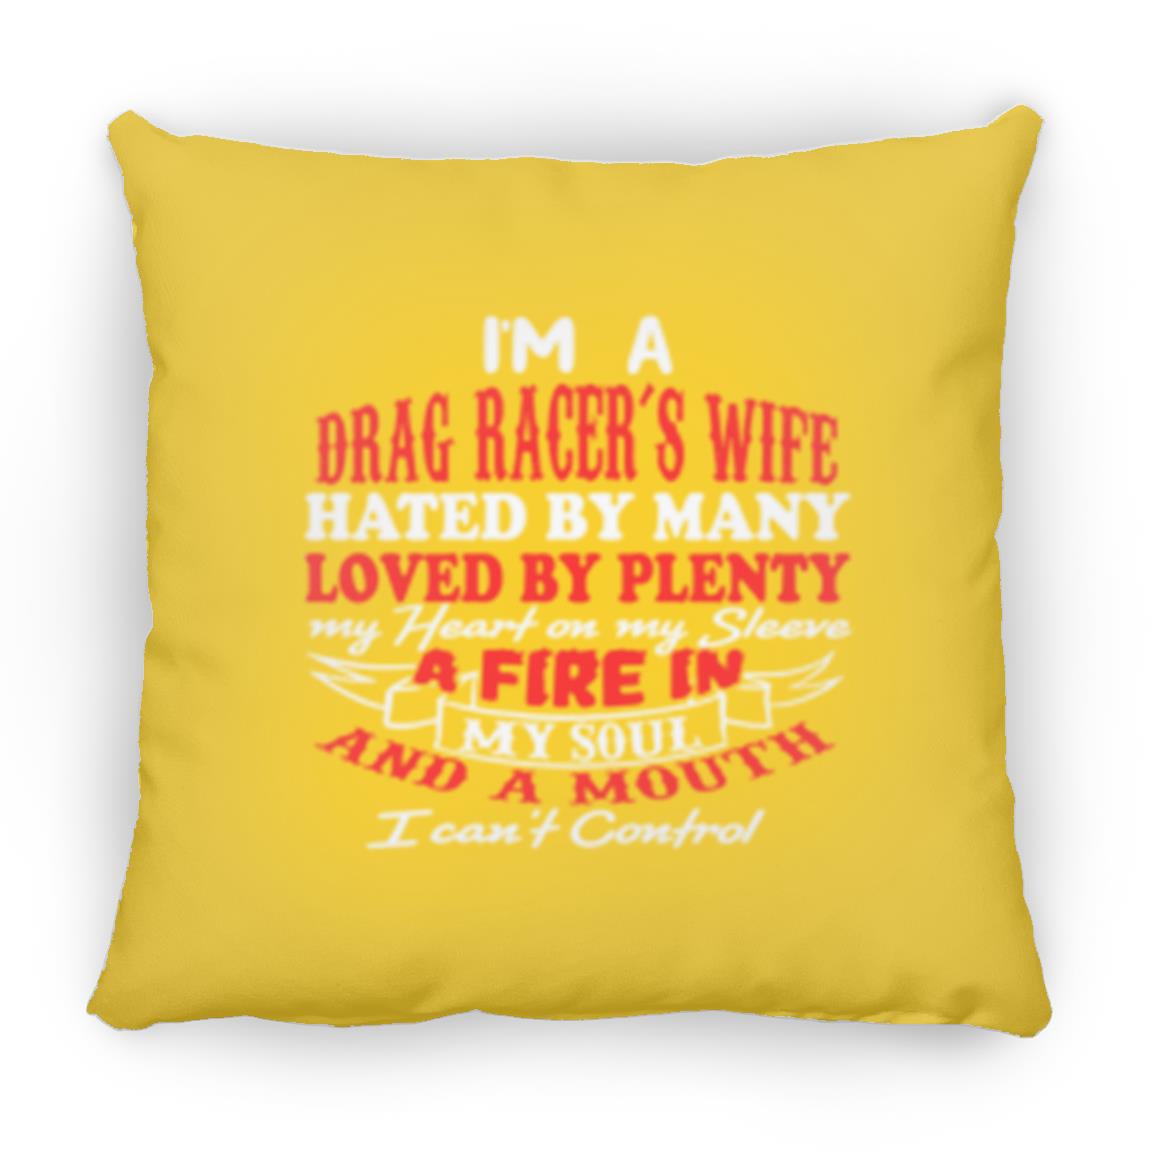 I'm A Drag Racer's Wife Hated By Many Loved By Plenty Small Square Pillow